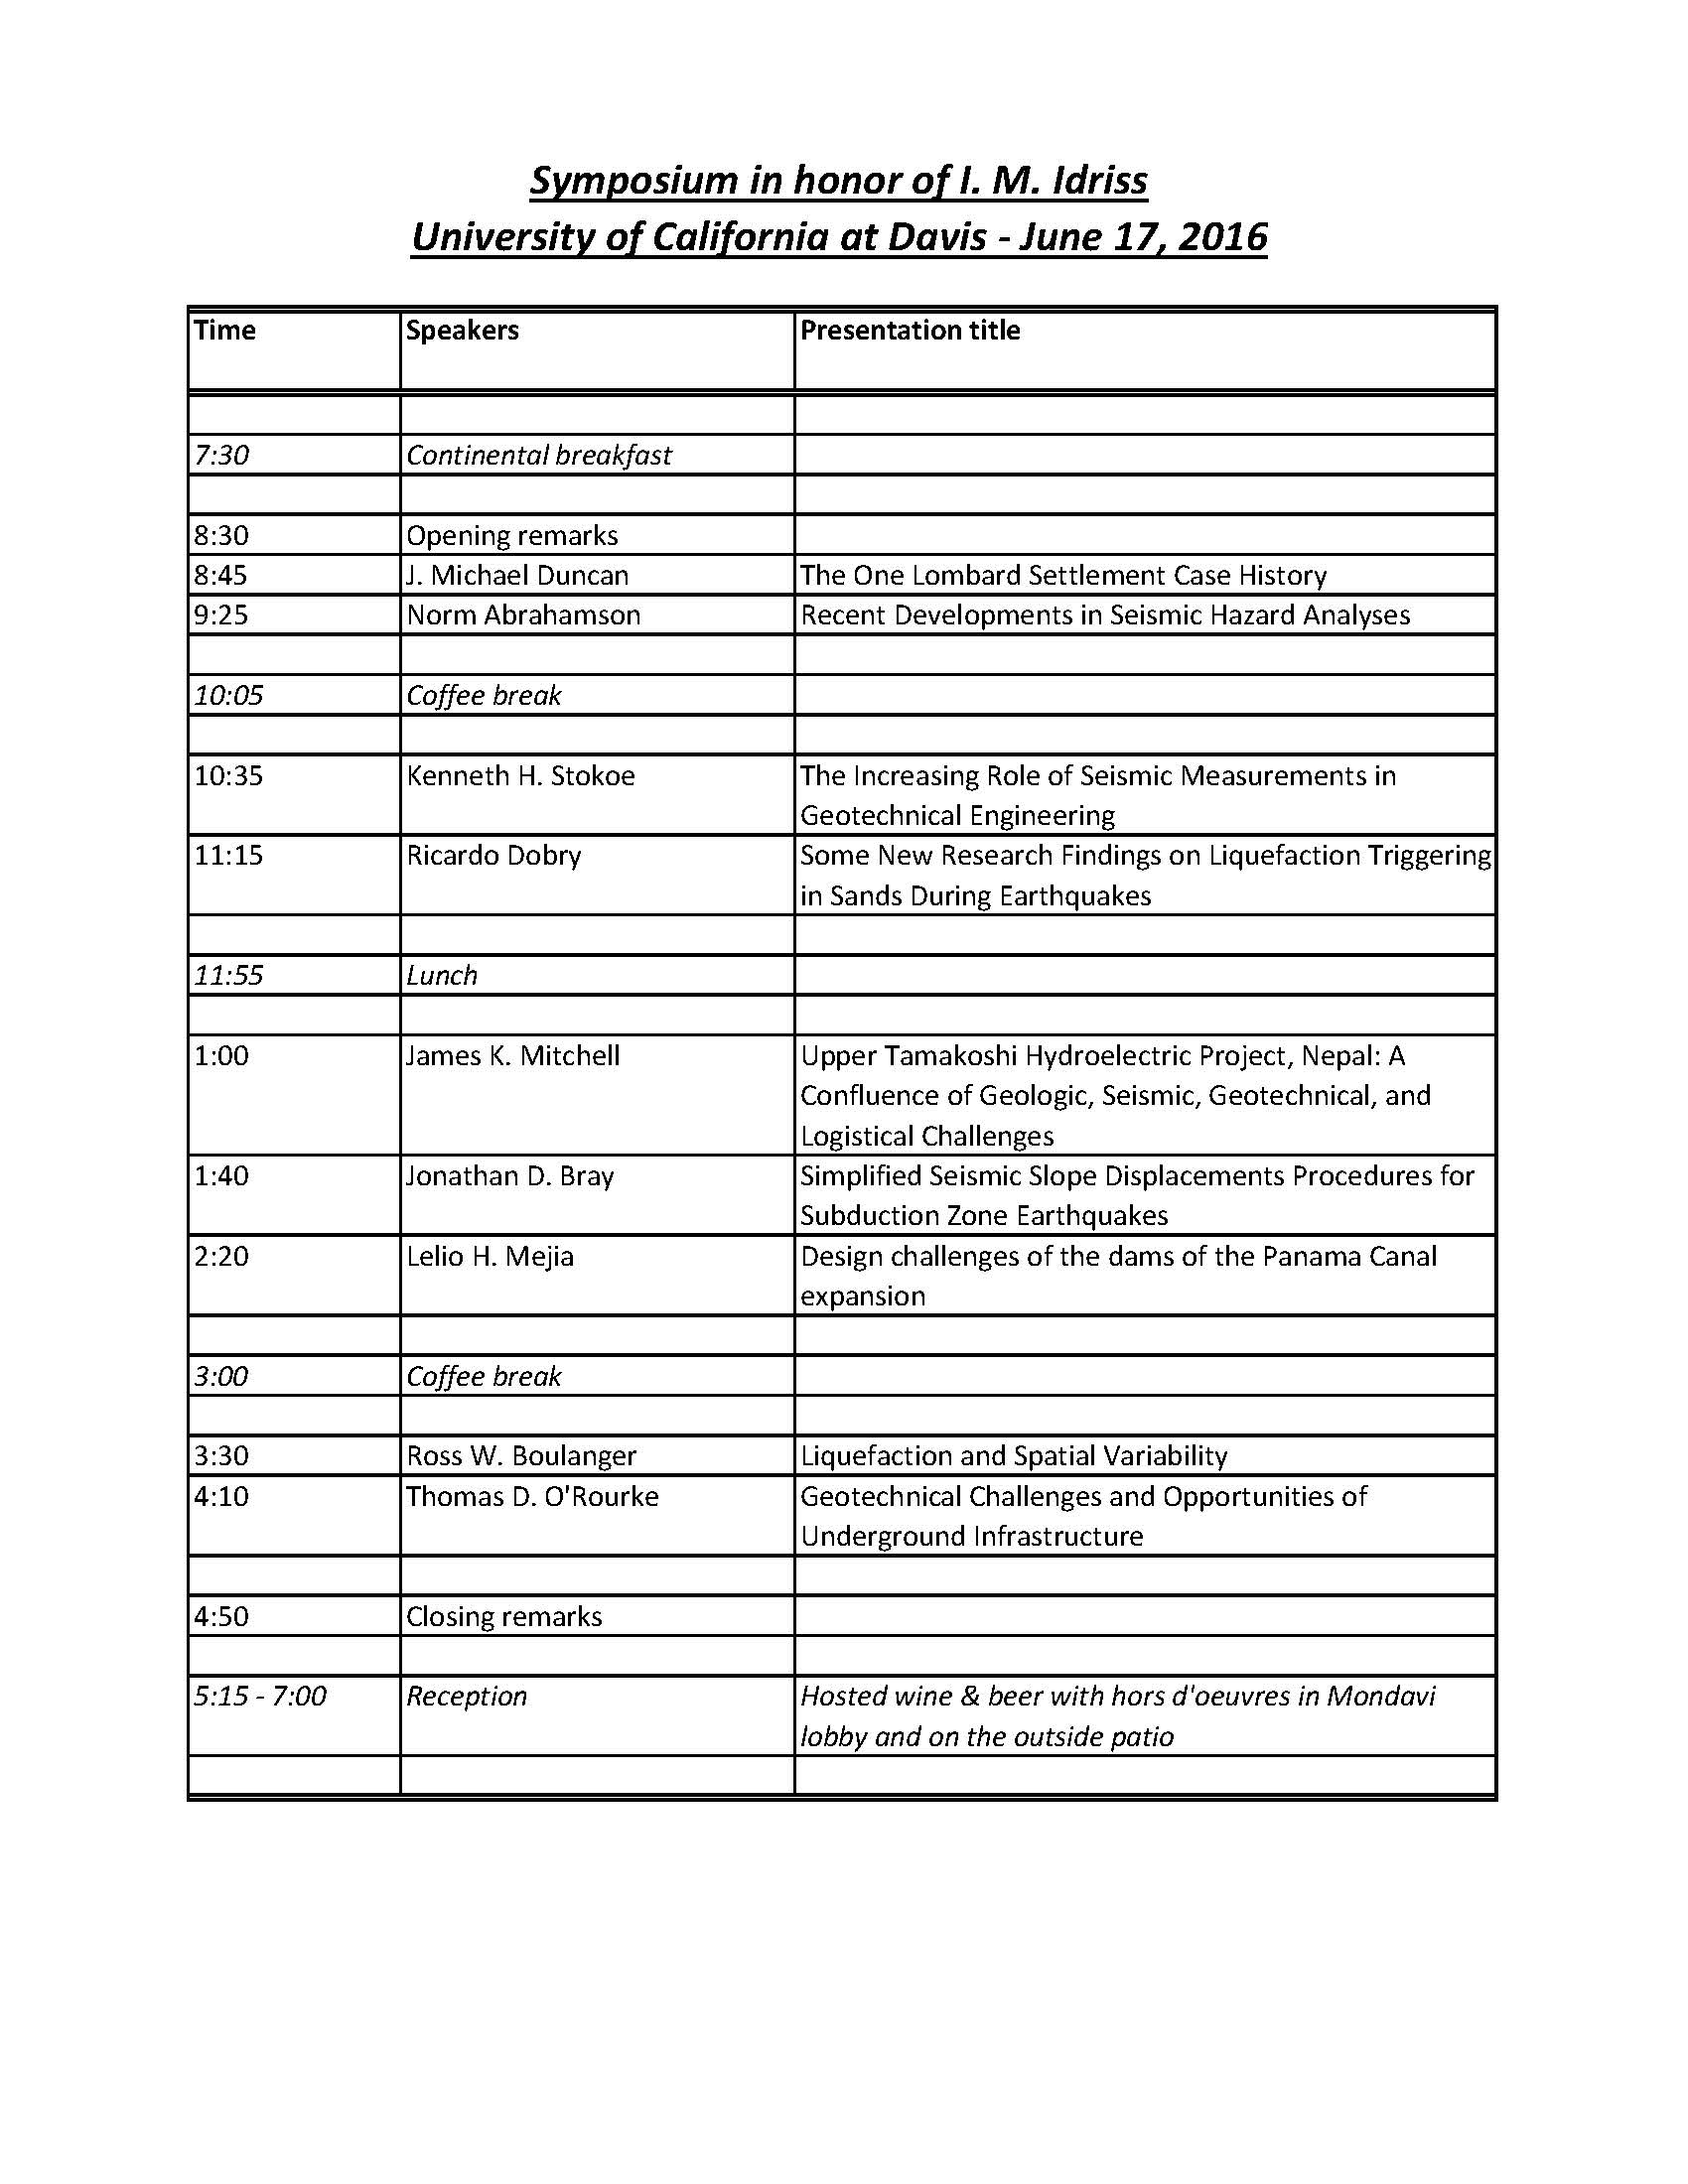 Symposium_Program_Schedule_and_Sponsors_2016_Page_2